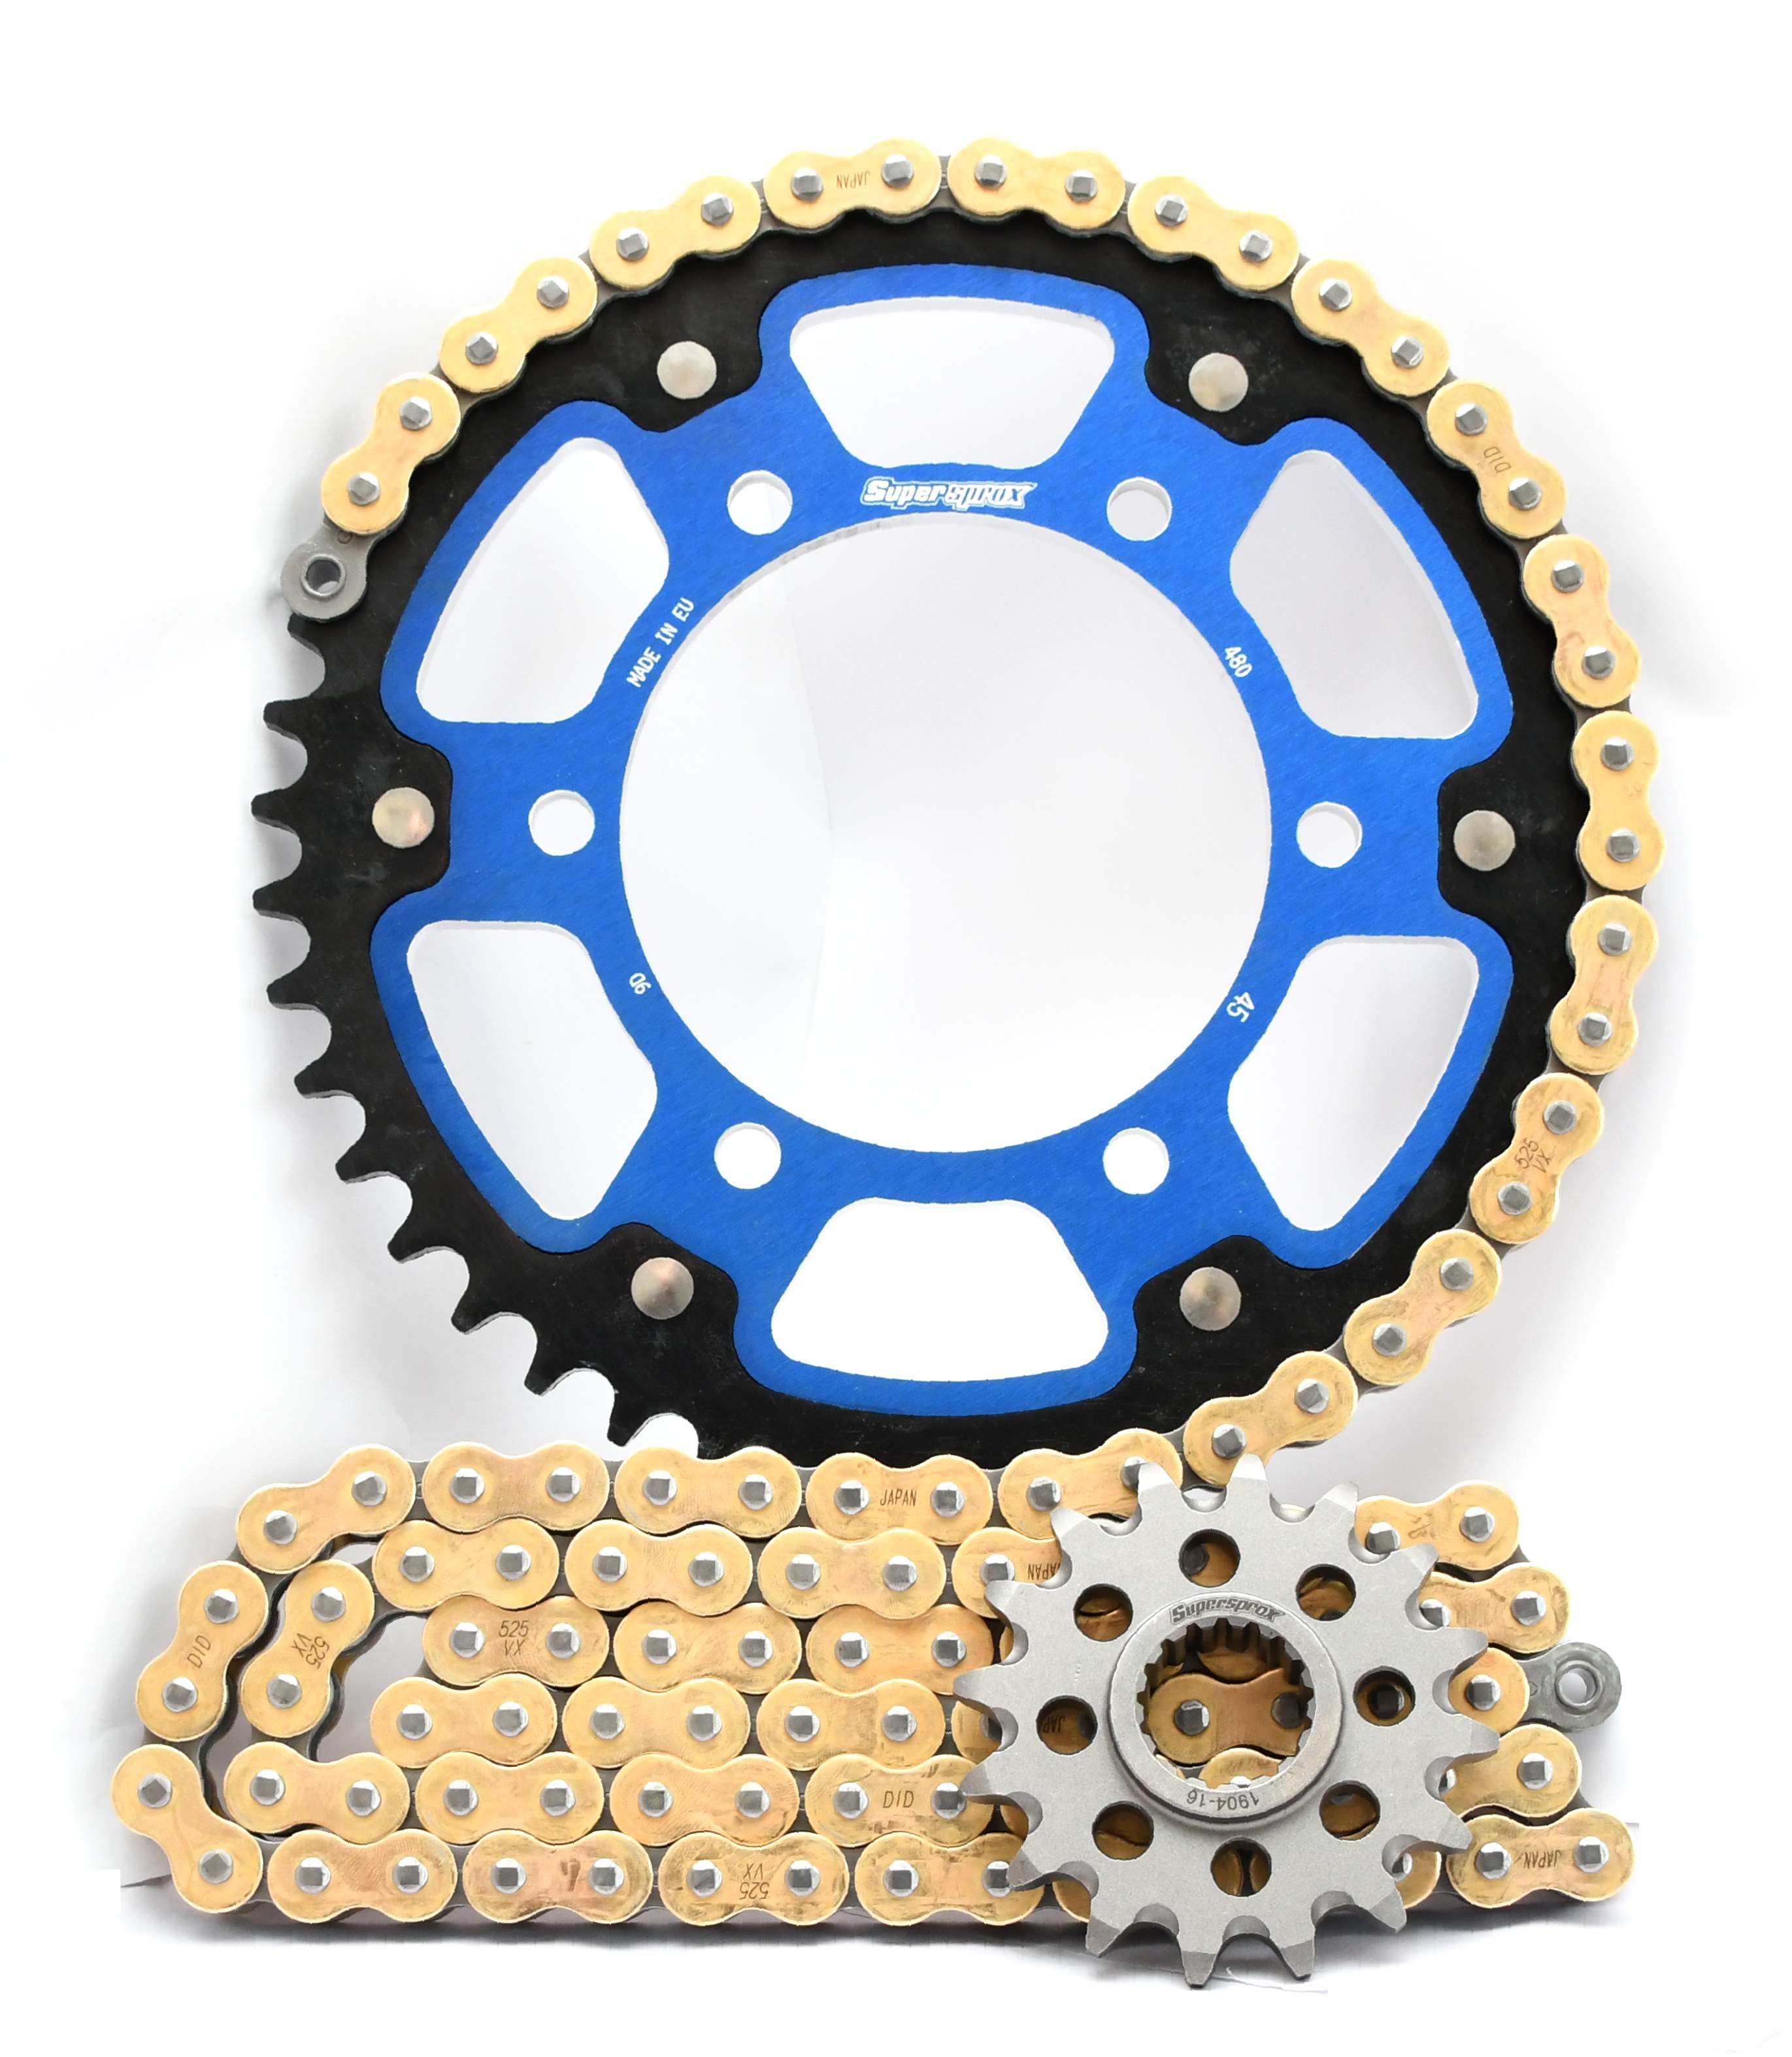 Supersprox Chain & Sprocket Kit for Yamaha YZF R6 2003-2005 - Standard Gearing - 530 Conversion - 0